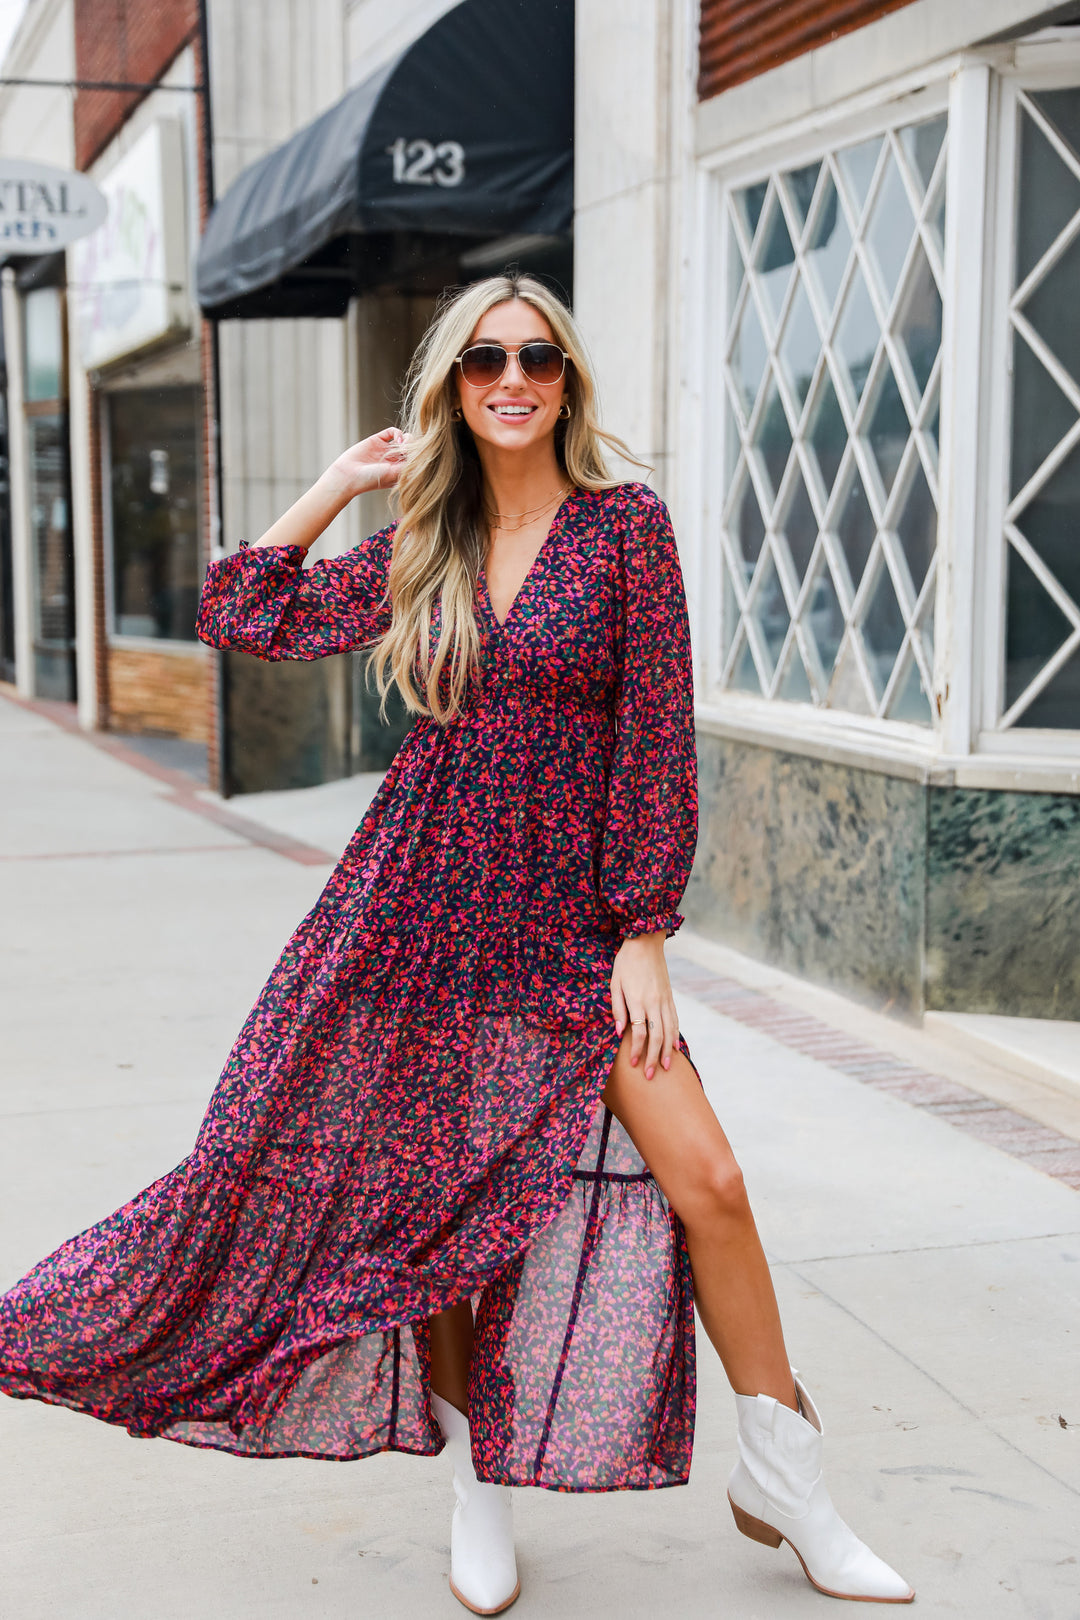 model wearing maxi length floral dress with white cowboy booties